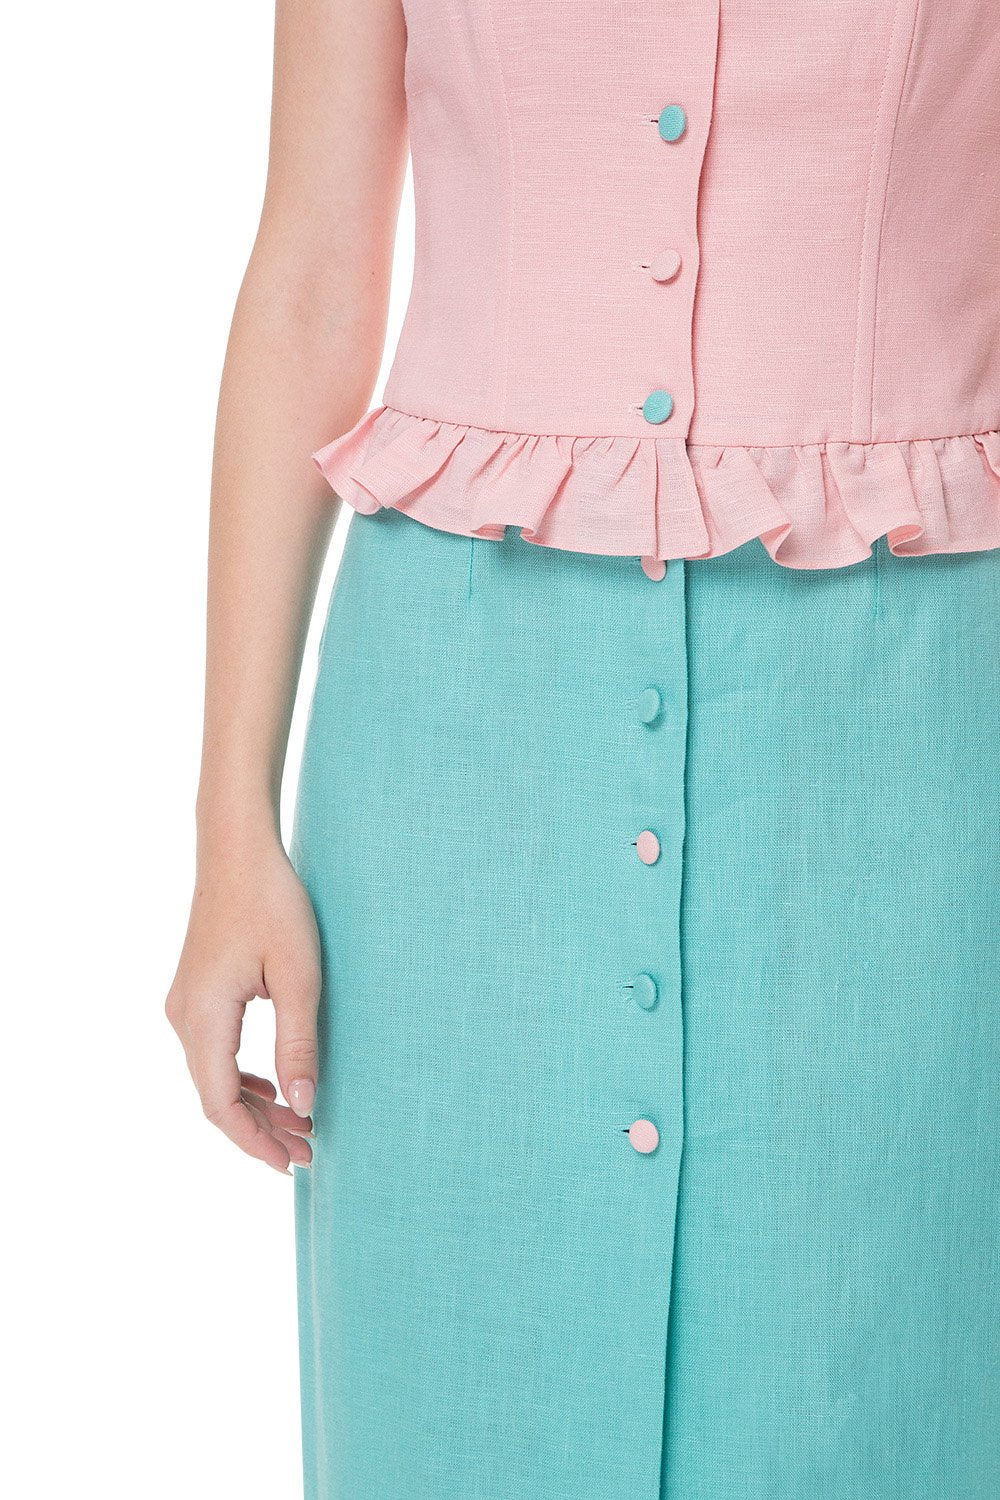 Mint Candy No Sleeves dress